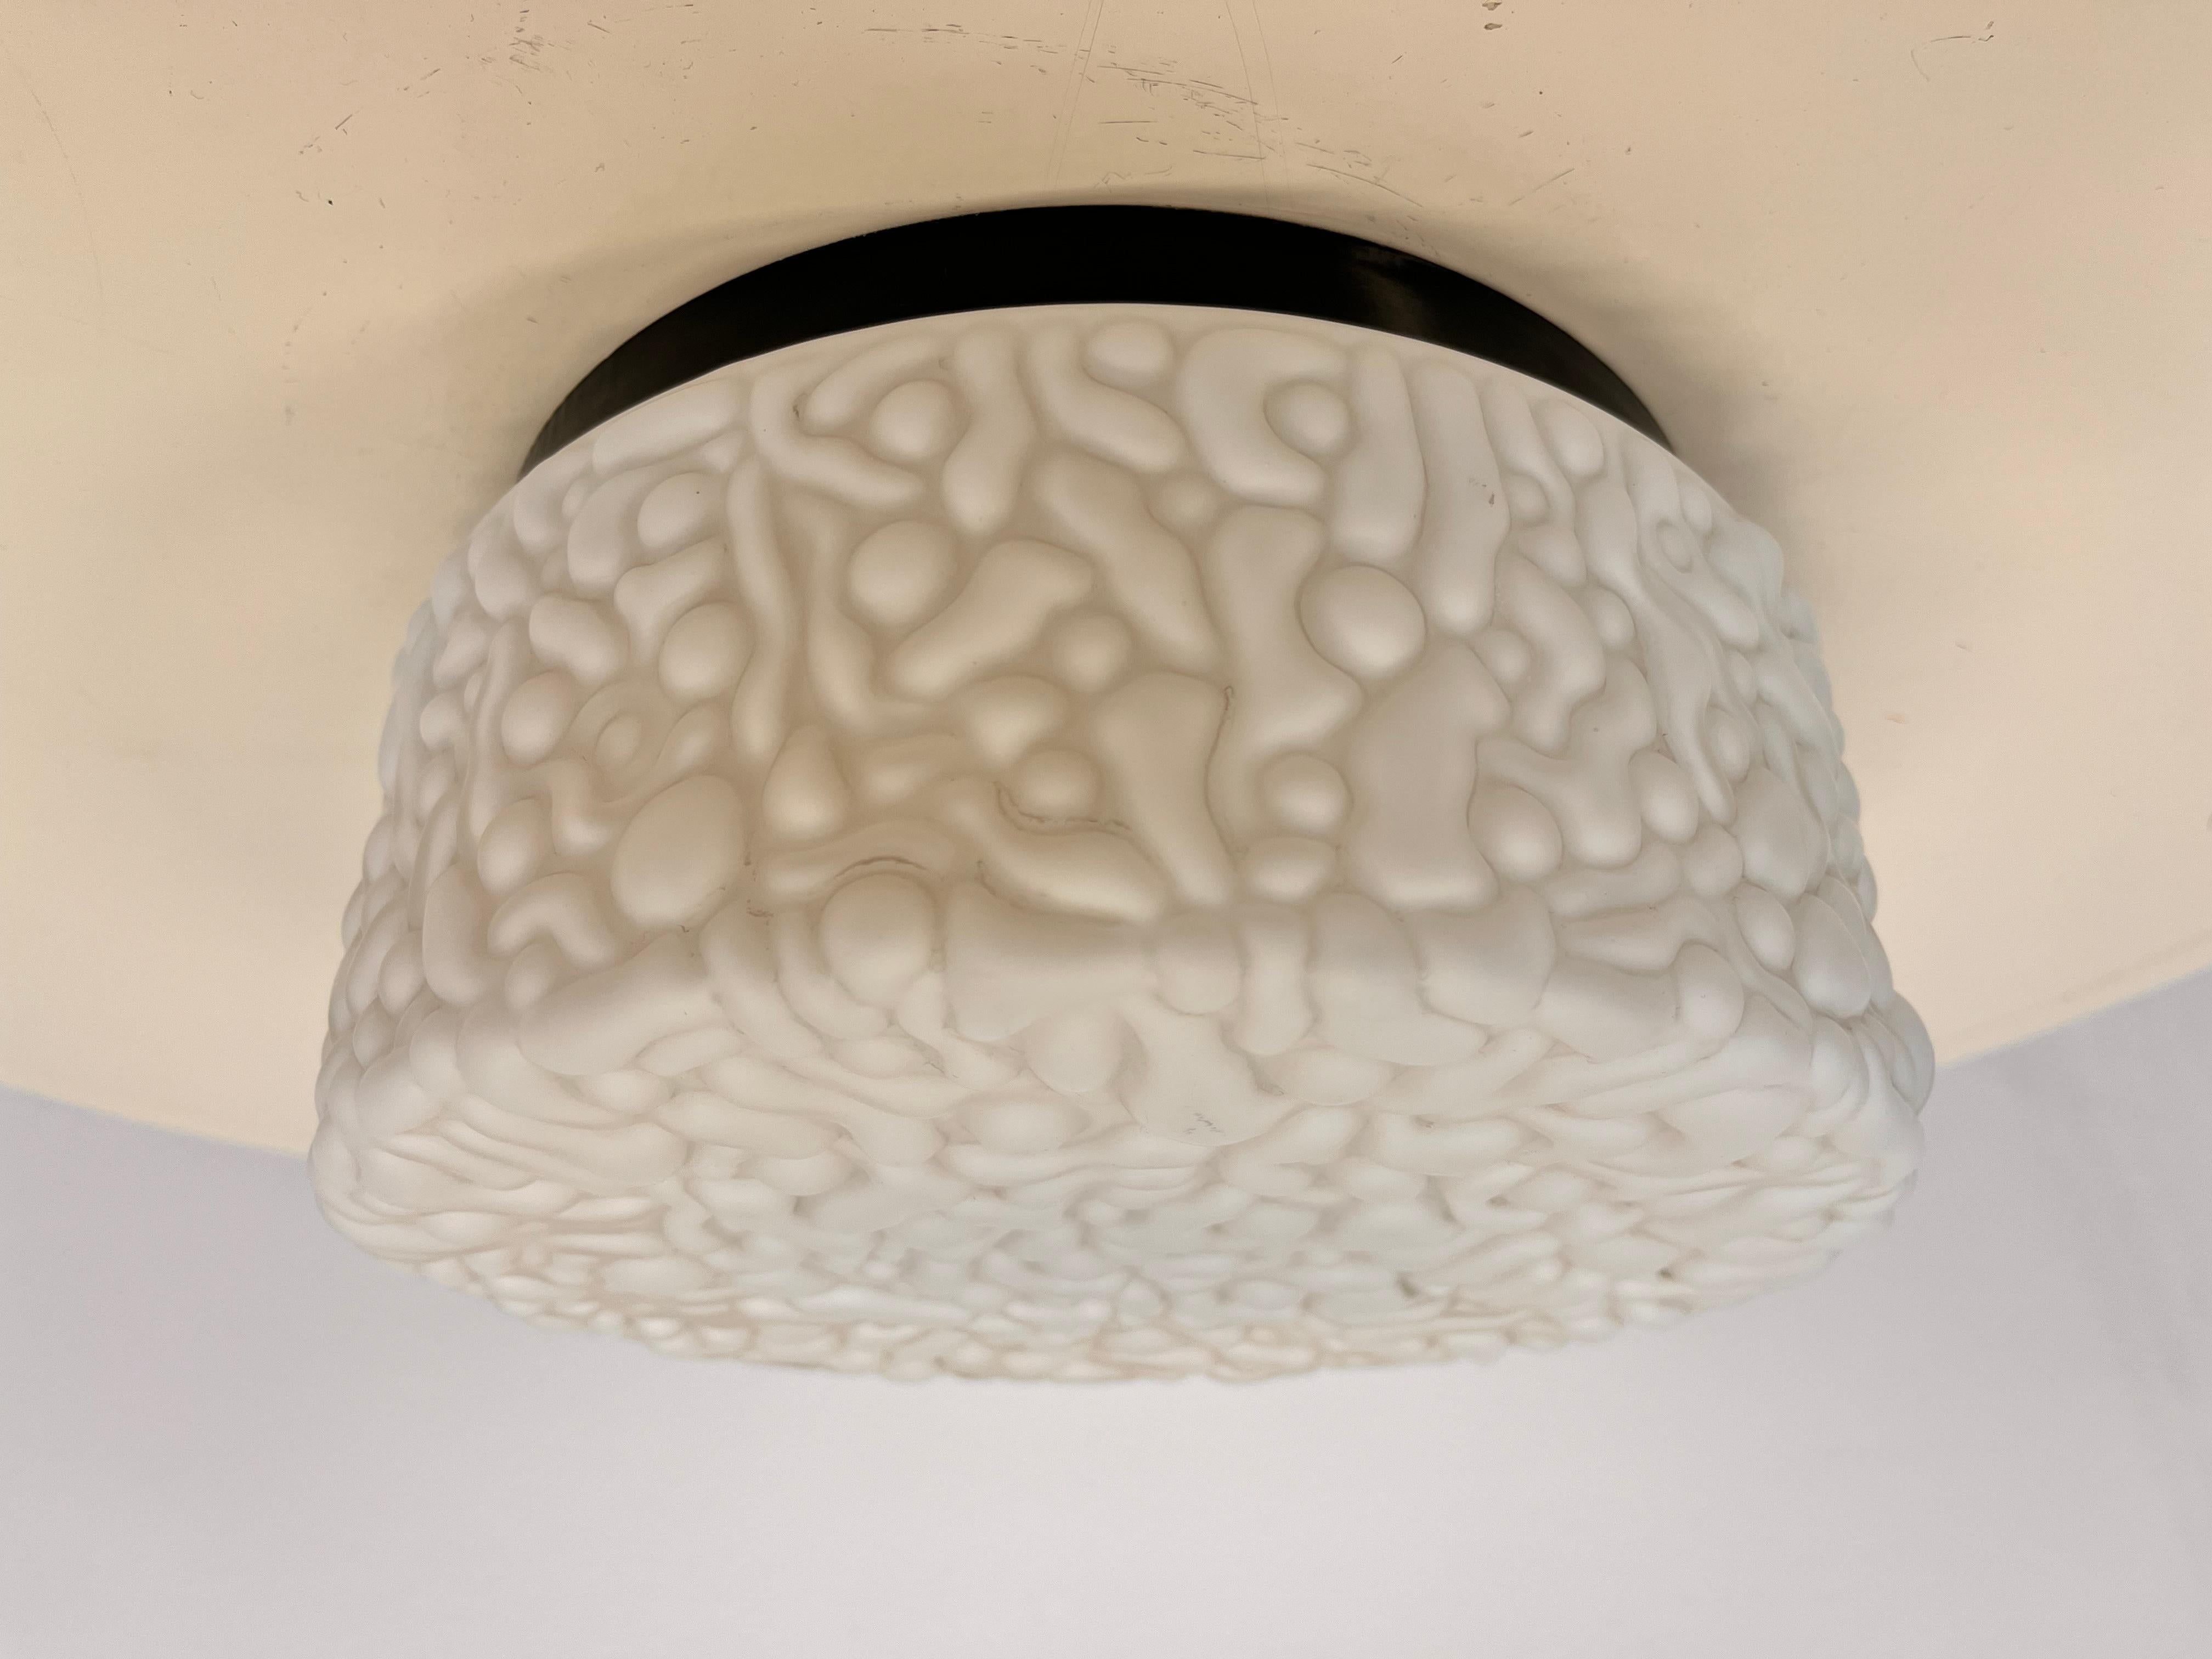 Late 20th Century Midcentury Wall or Ceiling Lamps, Flushmount, 1970s - up to 15 pieces For Sale